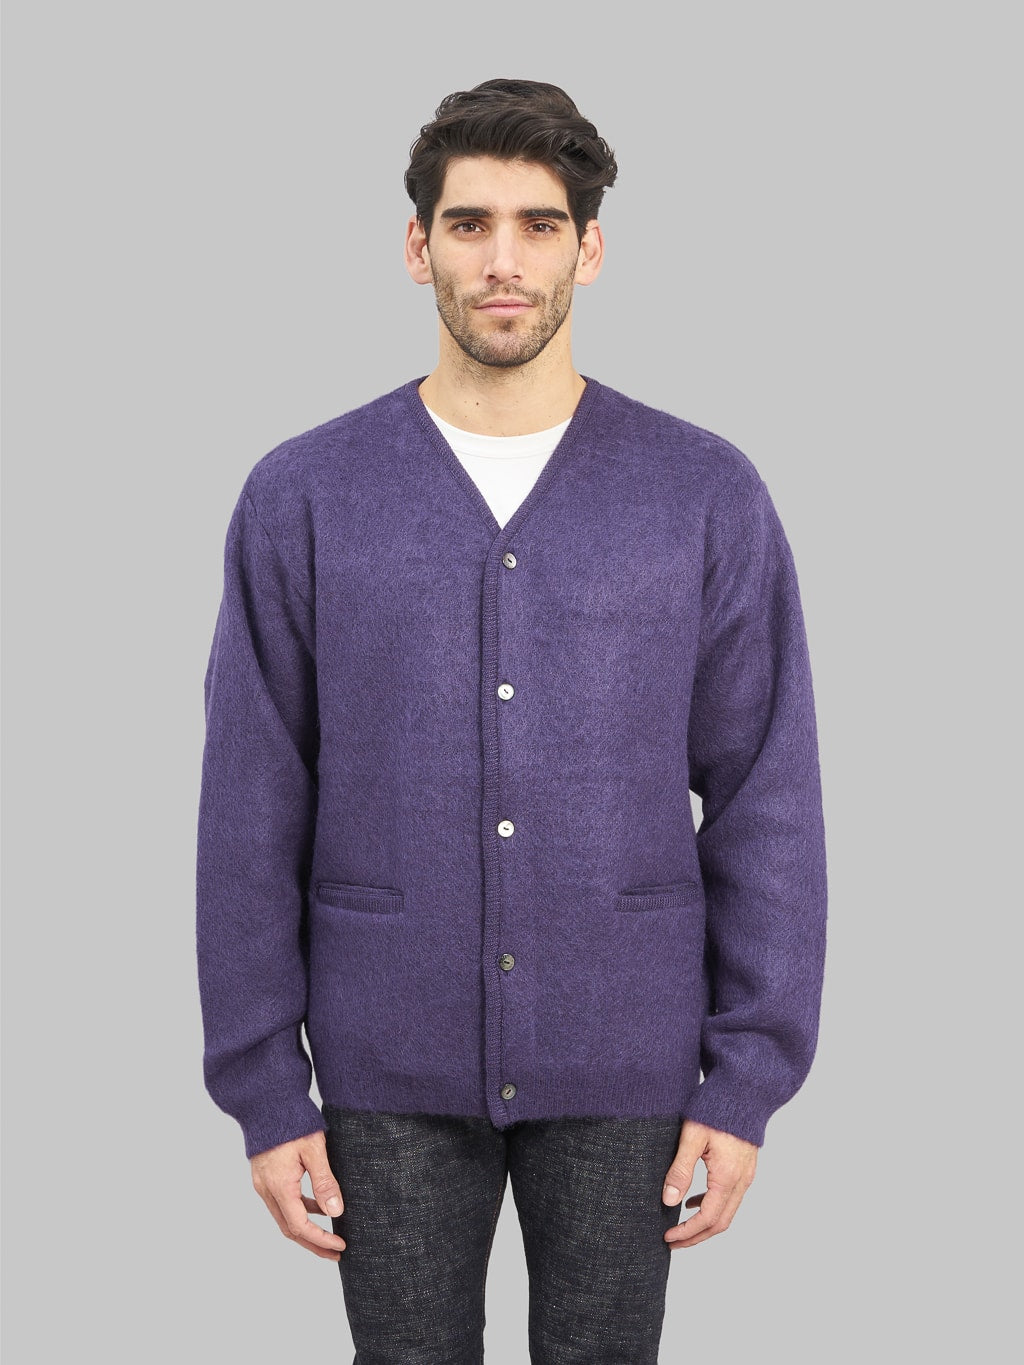 Trophy Clothing Mohair Knit Cardigan Dark Purple model front fit